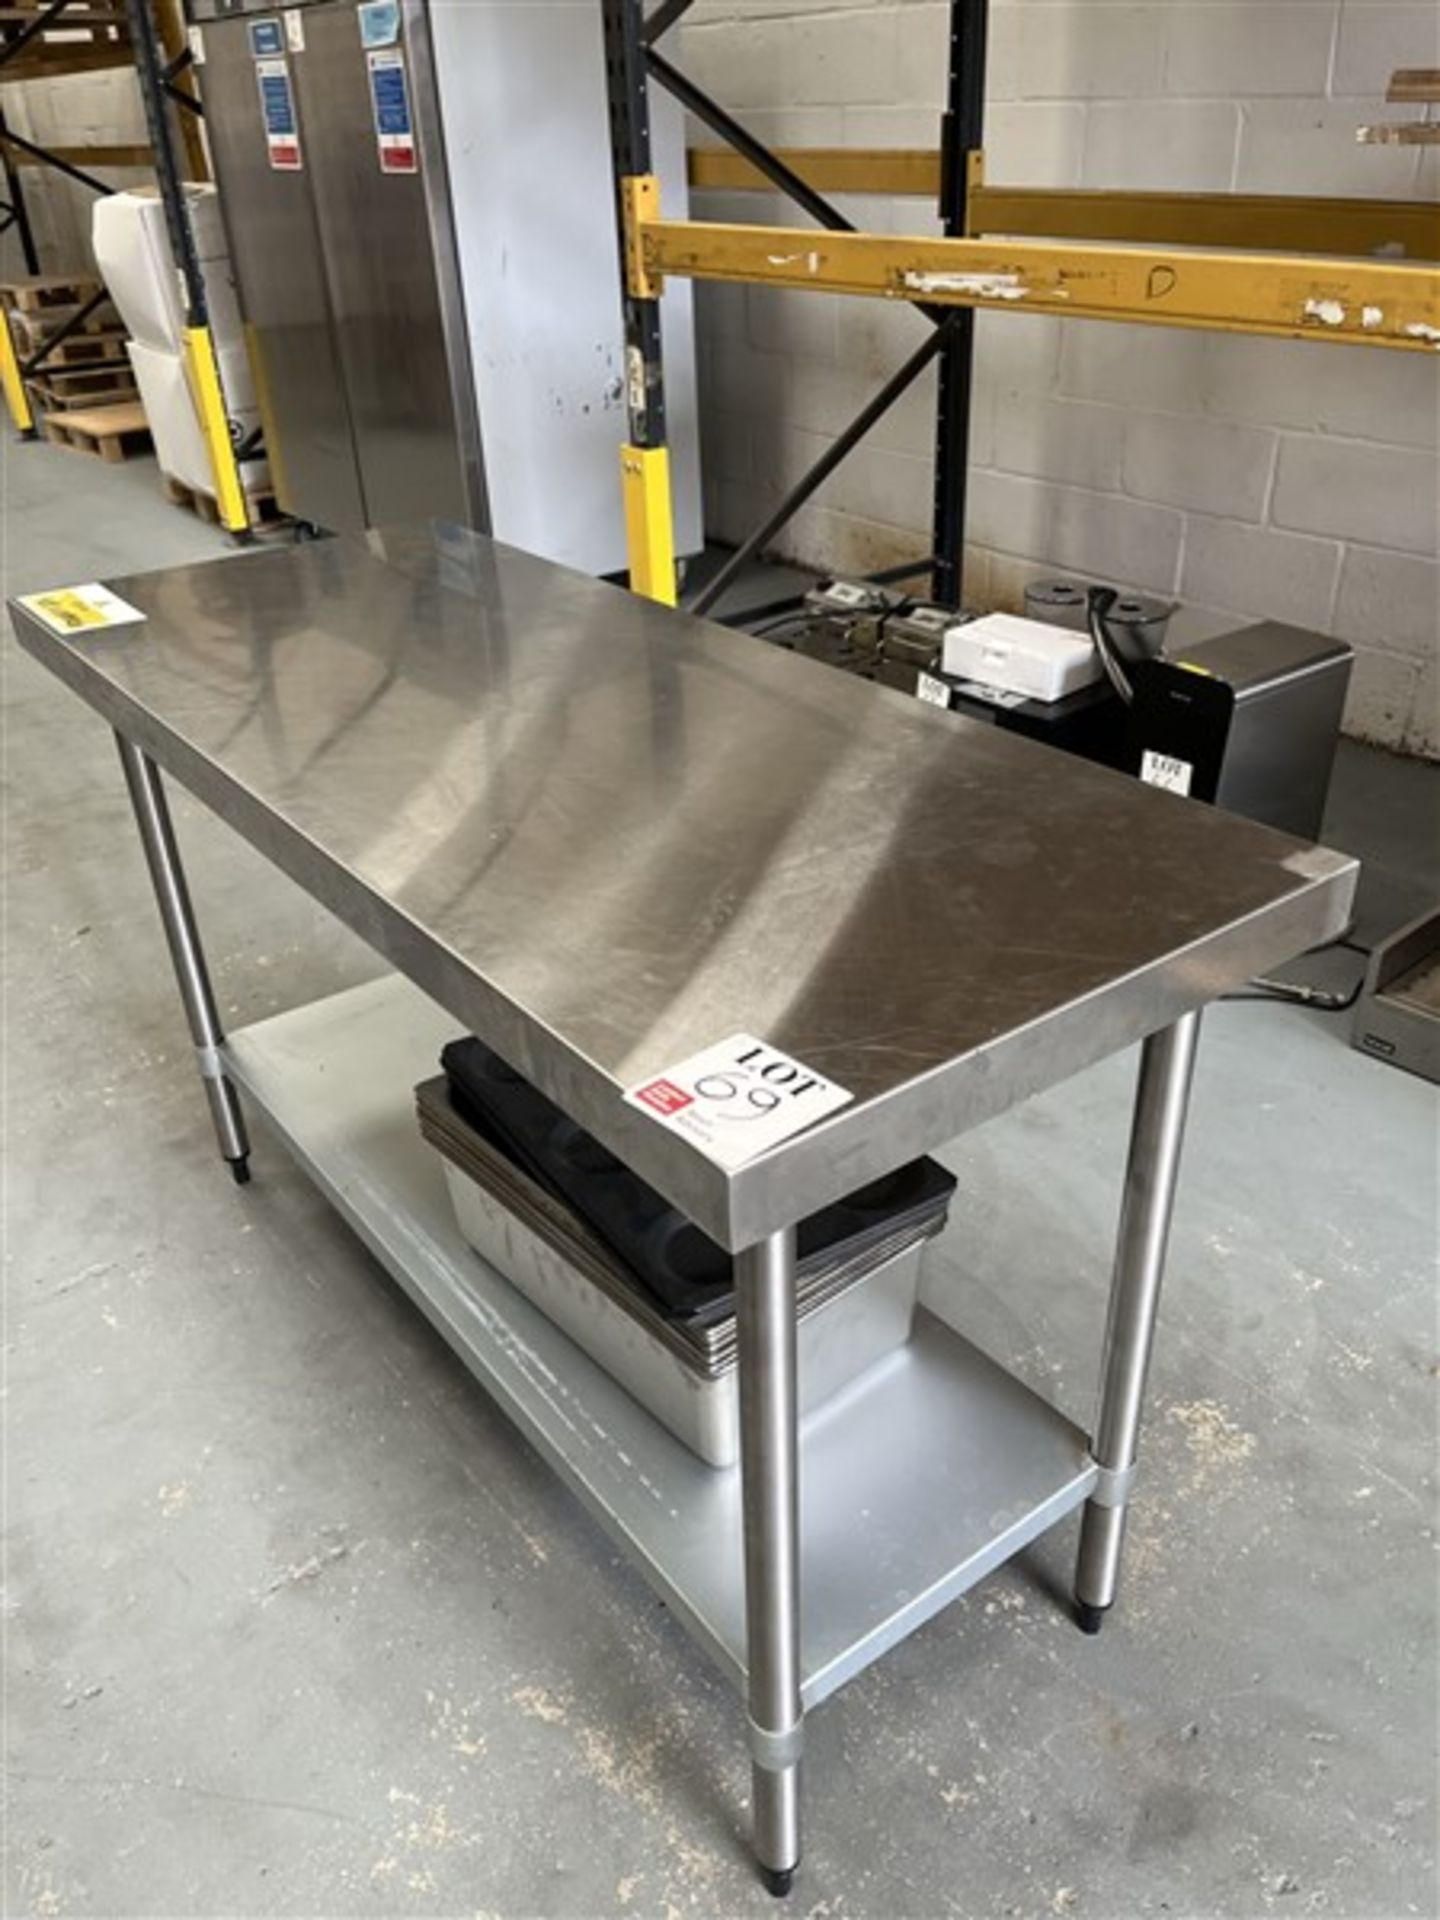 Stainless steel rectangular prep table, approx 1500 x 600mm, with stainless steel catering trays (